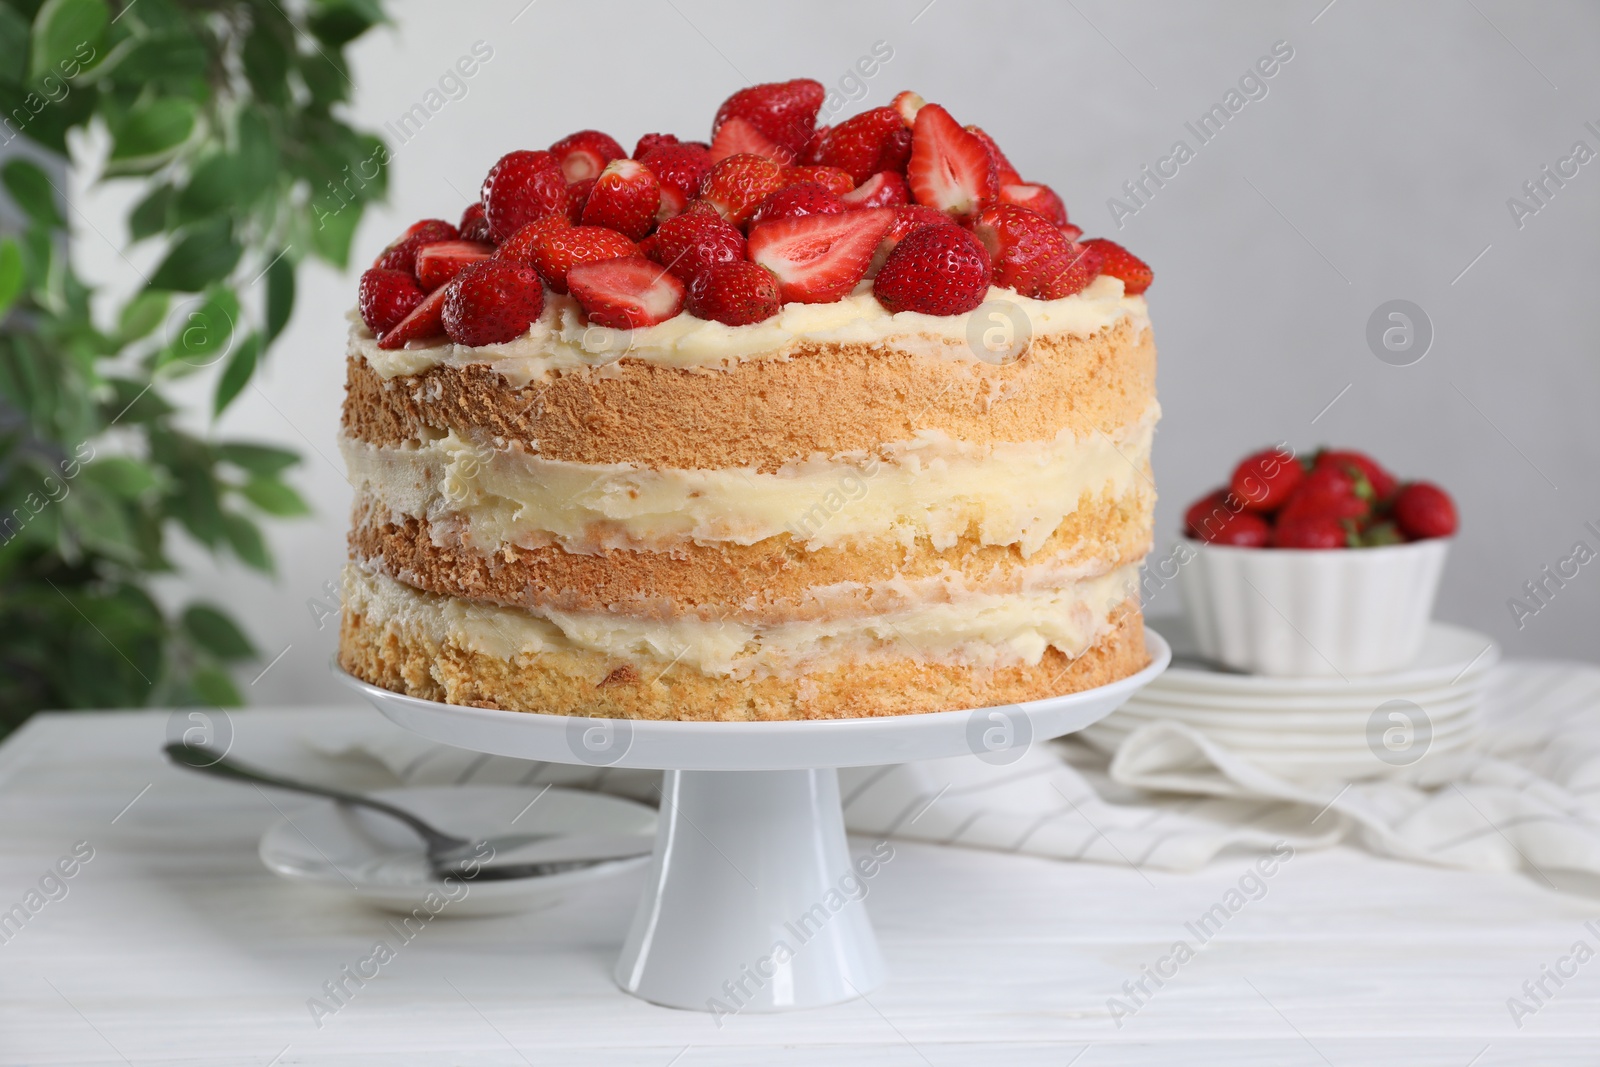 Photo of Tasty cake with fresh strawberries served on white wooden table